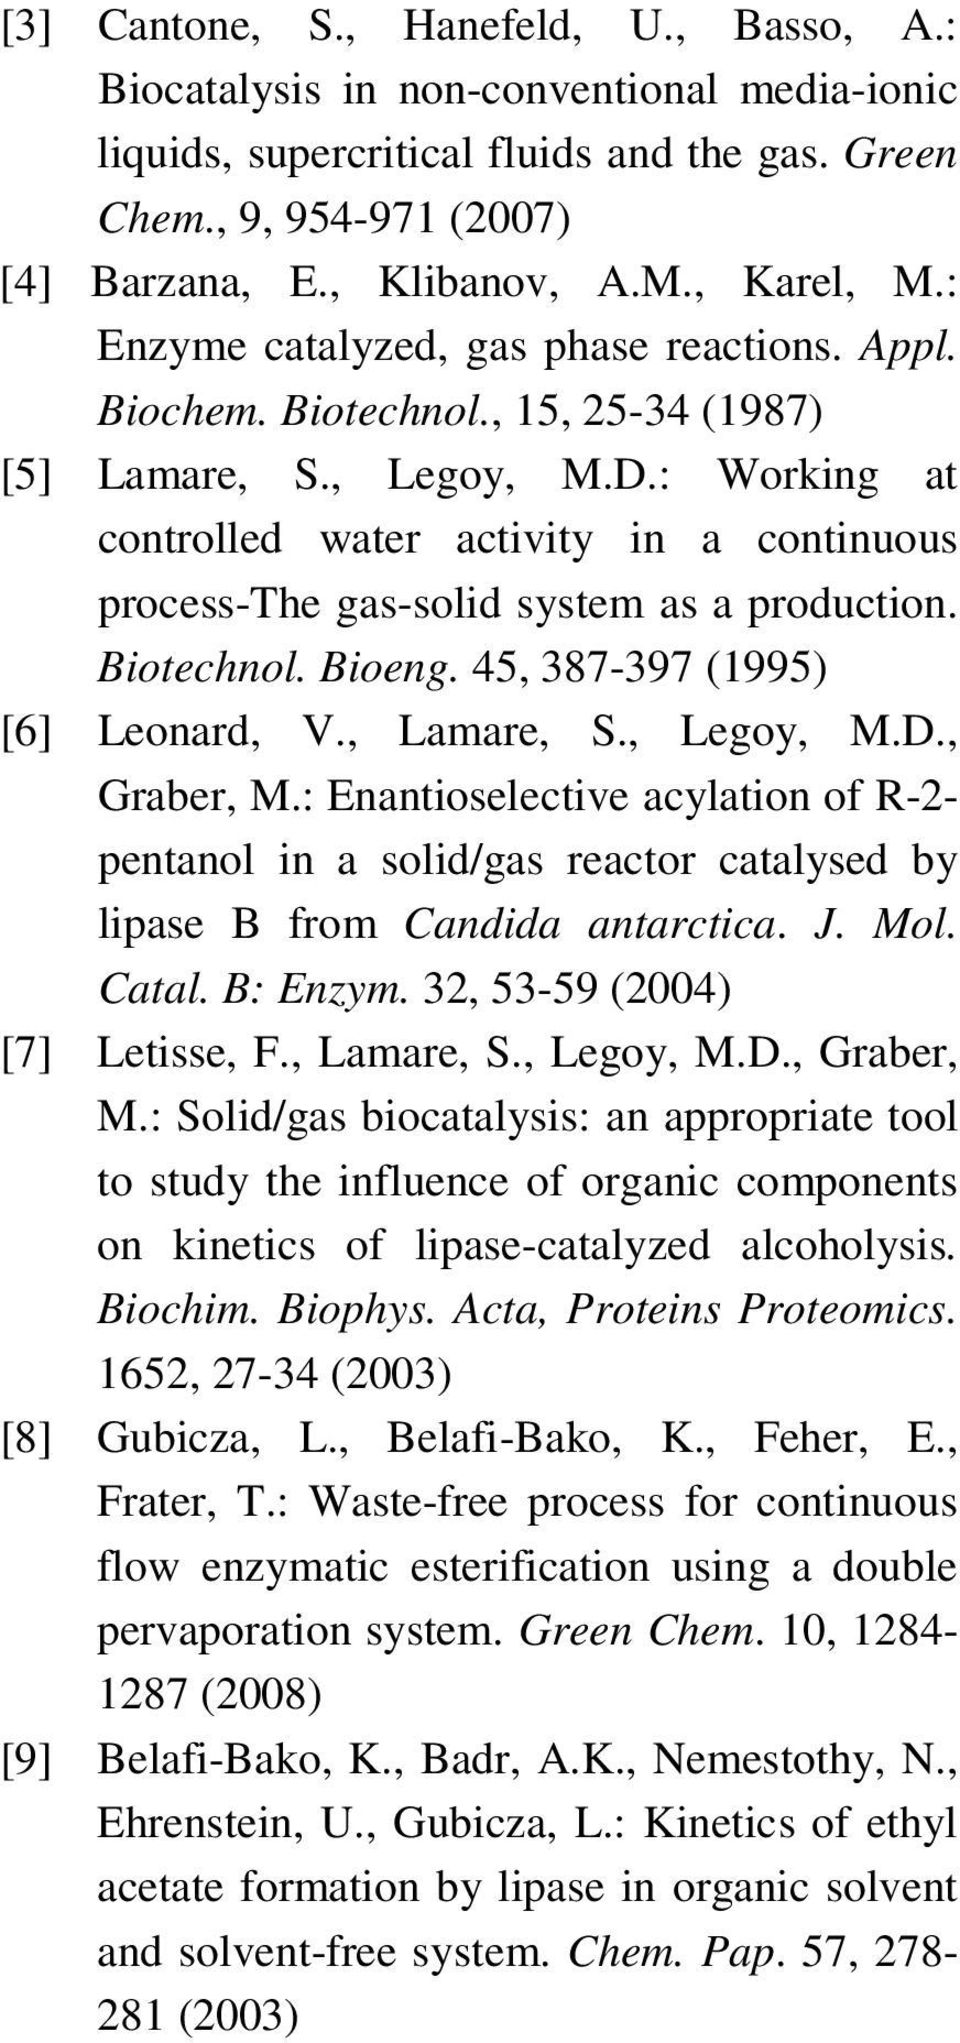 : Working at controlled water activity in a continuous process-the gas-solid system as a production. Biotechnol. Bioeng. 45, 387-397 (1995) [6] Leonard, V., Lamare, S., Legoy, M.D., Graber, M.